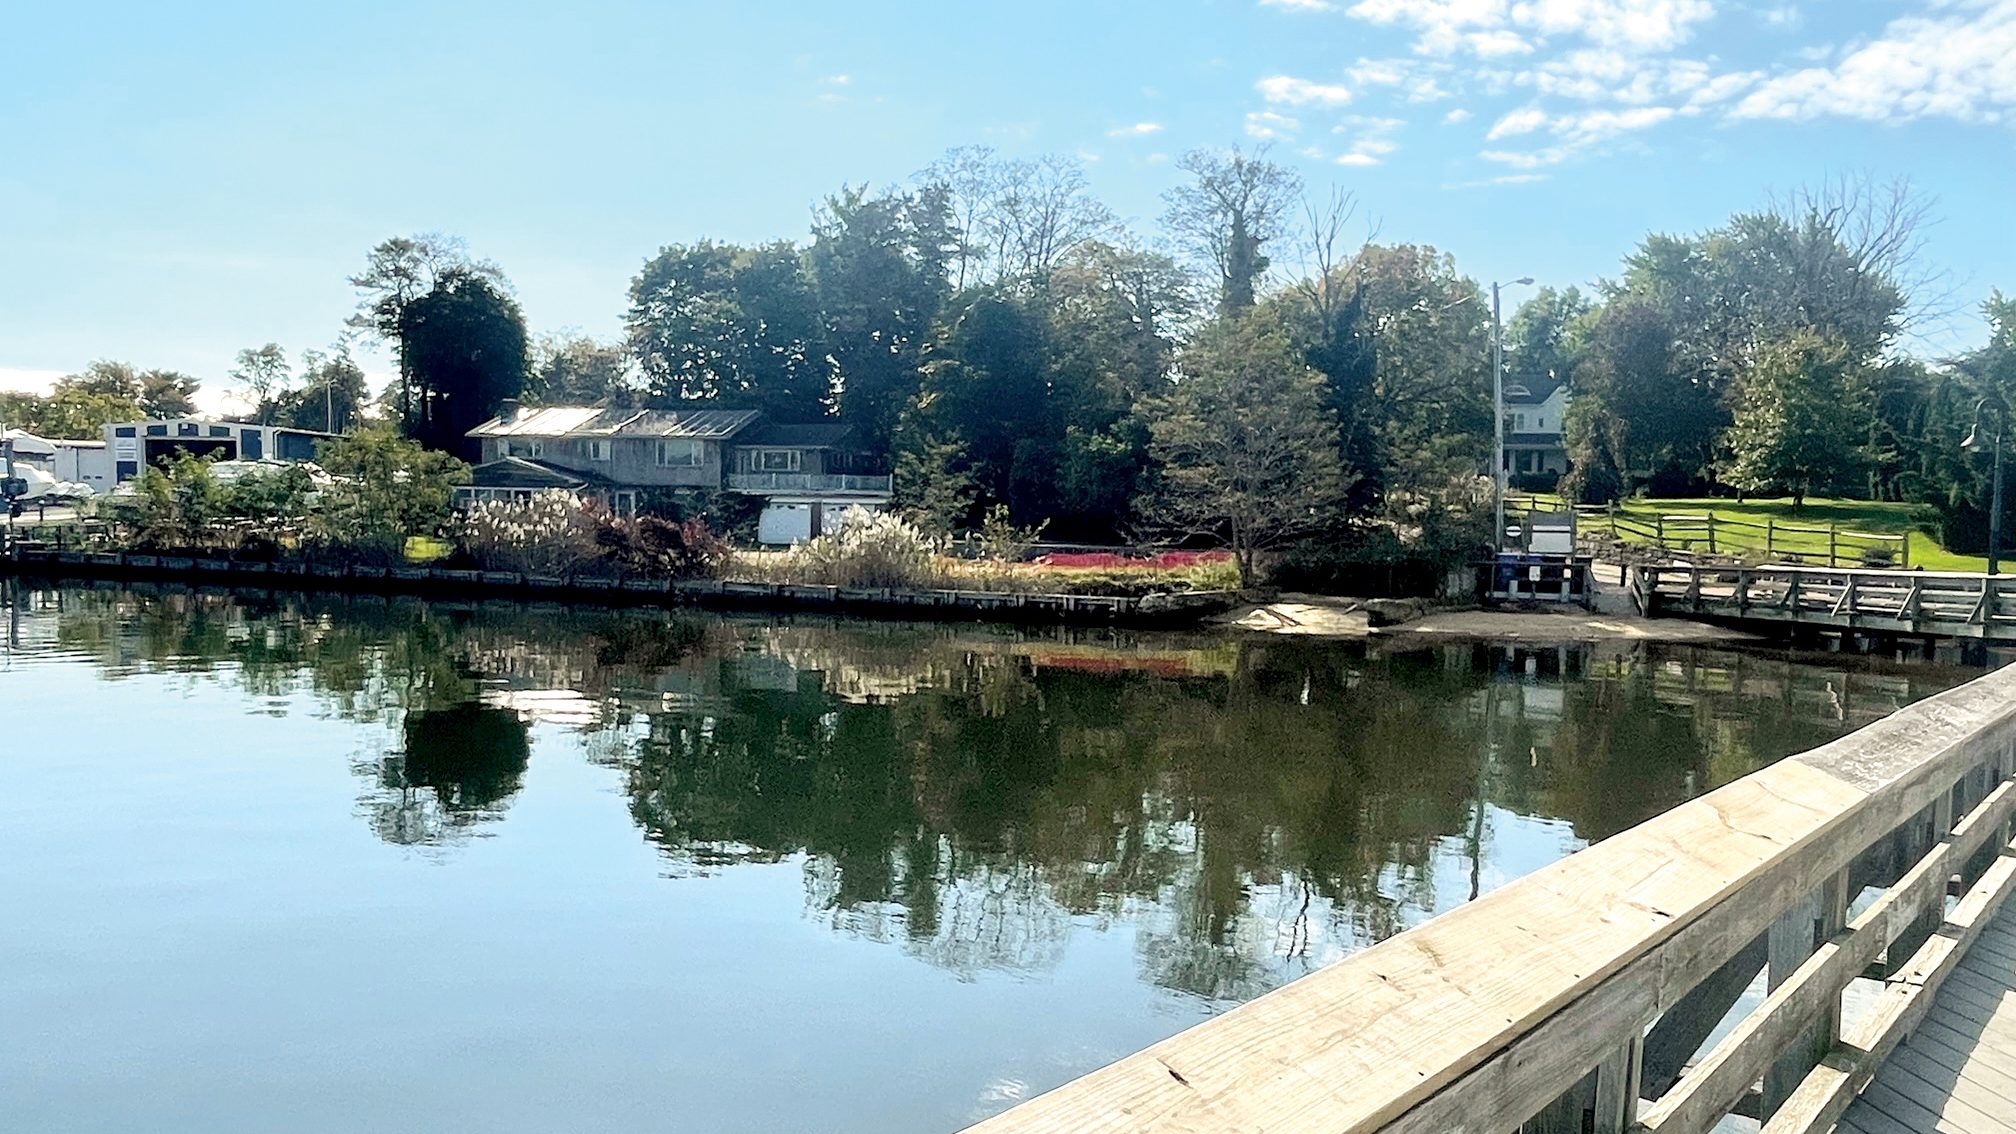 The Borough of Fair Haven will apply for two grants to cover most of the cost of acquiring 21 Fair Haven Road, an abandoned waterfront property, to create a park in the future. Stephen Appezzato